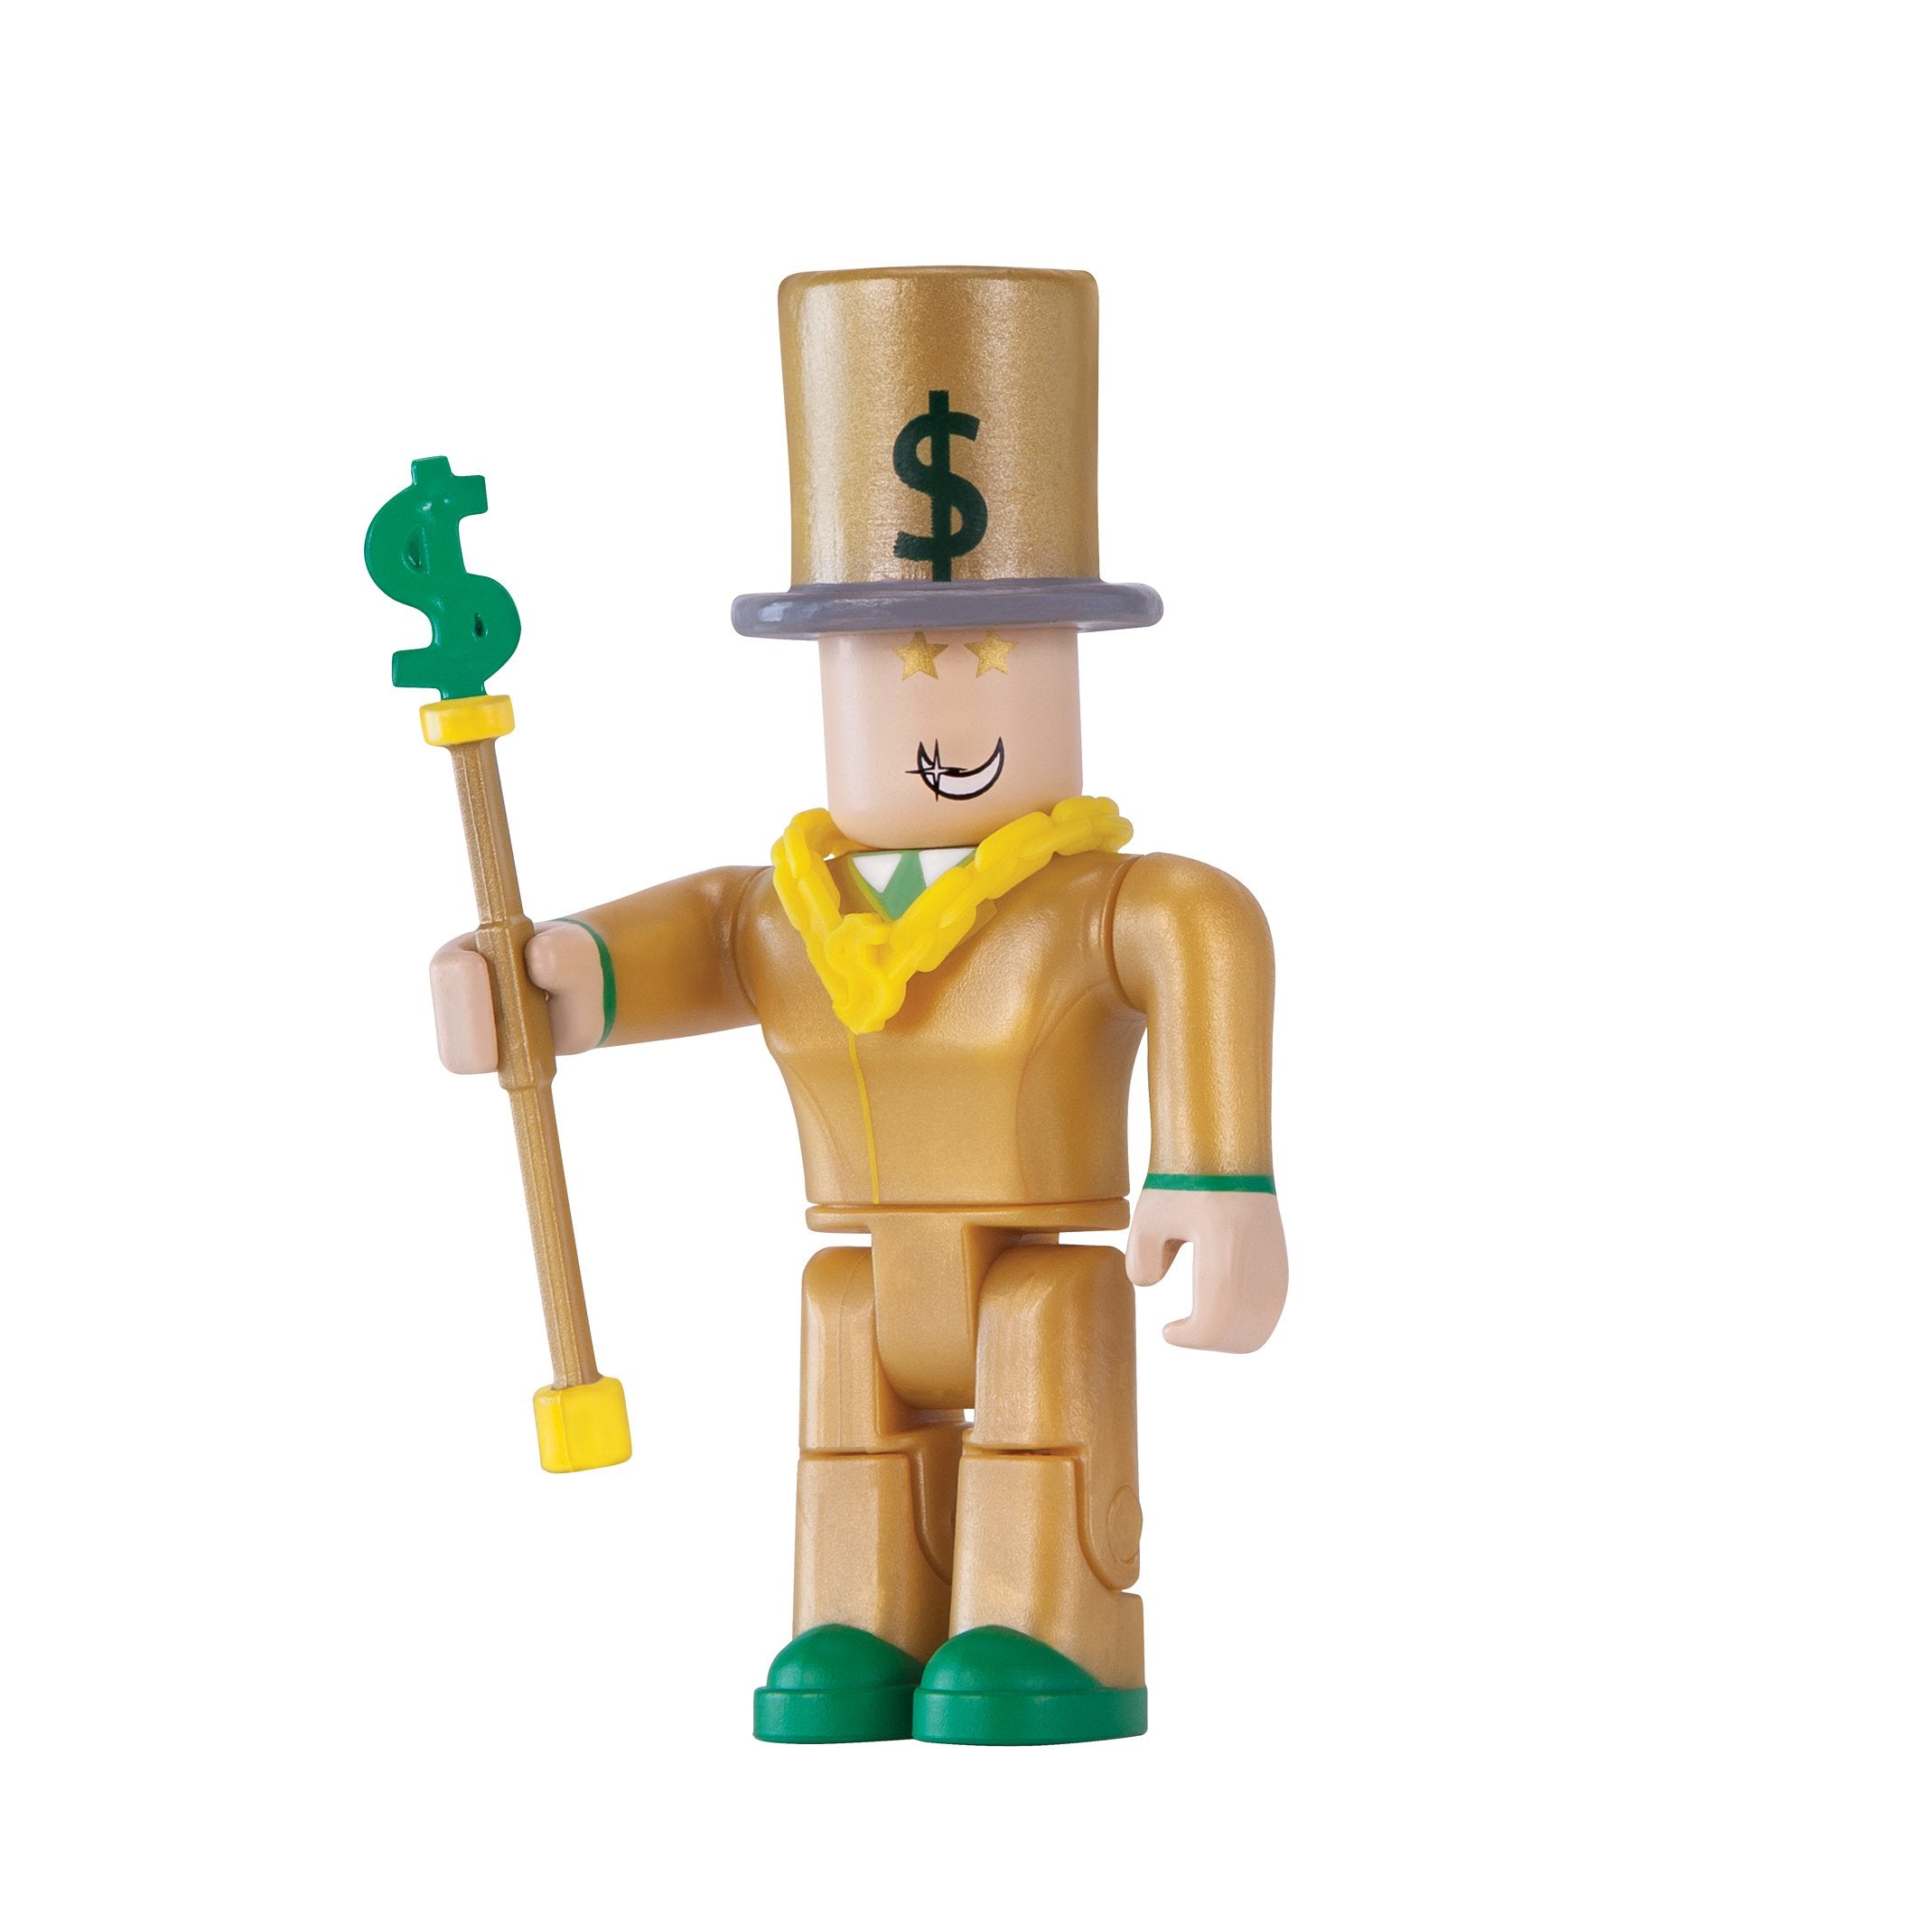 Other Action Figures Roblox Mr Bling Bling Figure Pack For Sale - roblox series 2 prison life action figure set by roblox